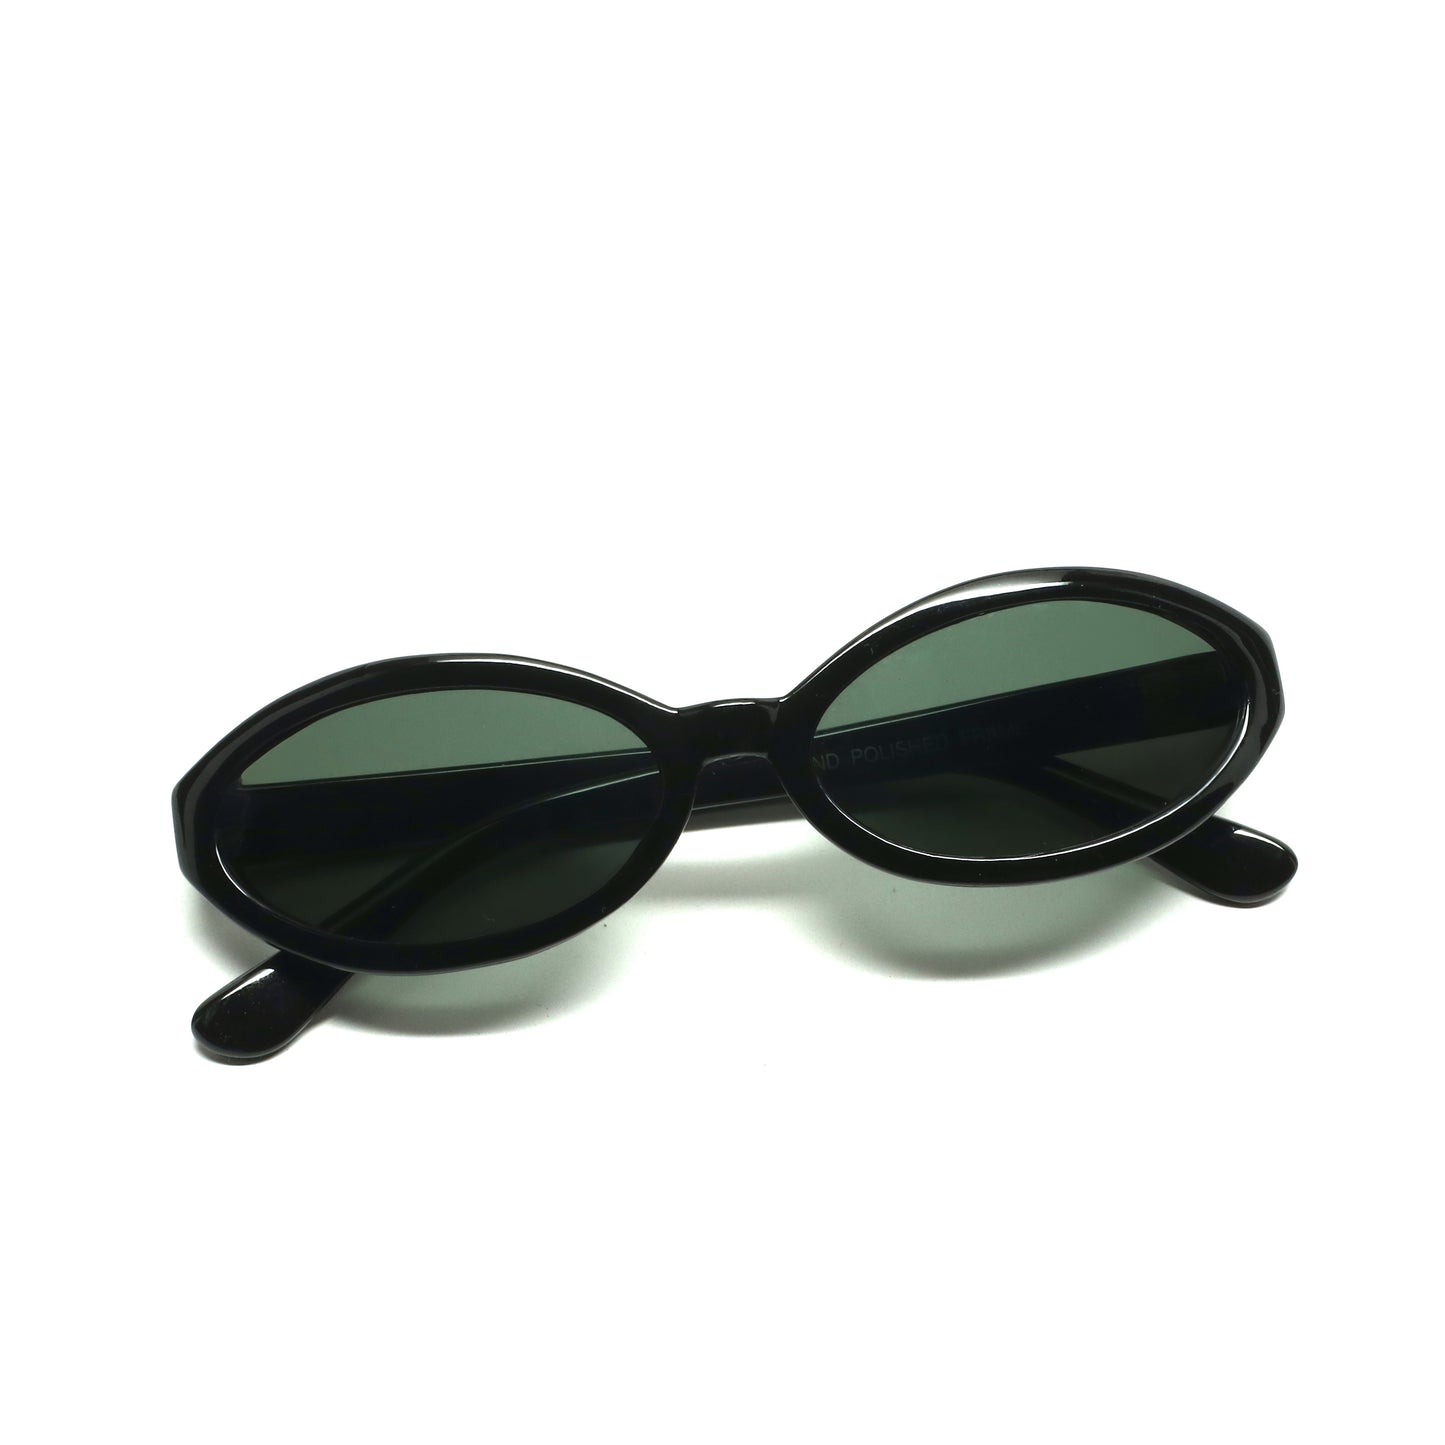 //Style 41// Deluxe Vintage 90s Deadstock High Quality Oval Sunglasses - Black